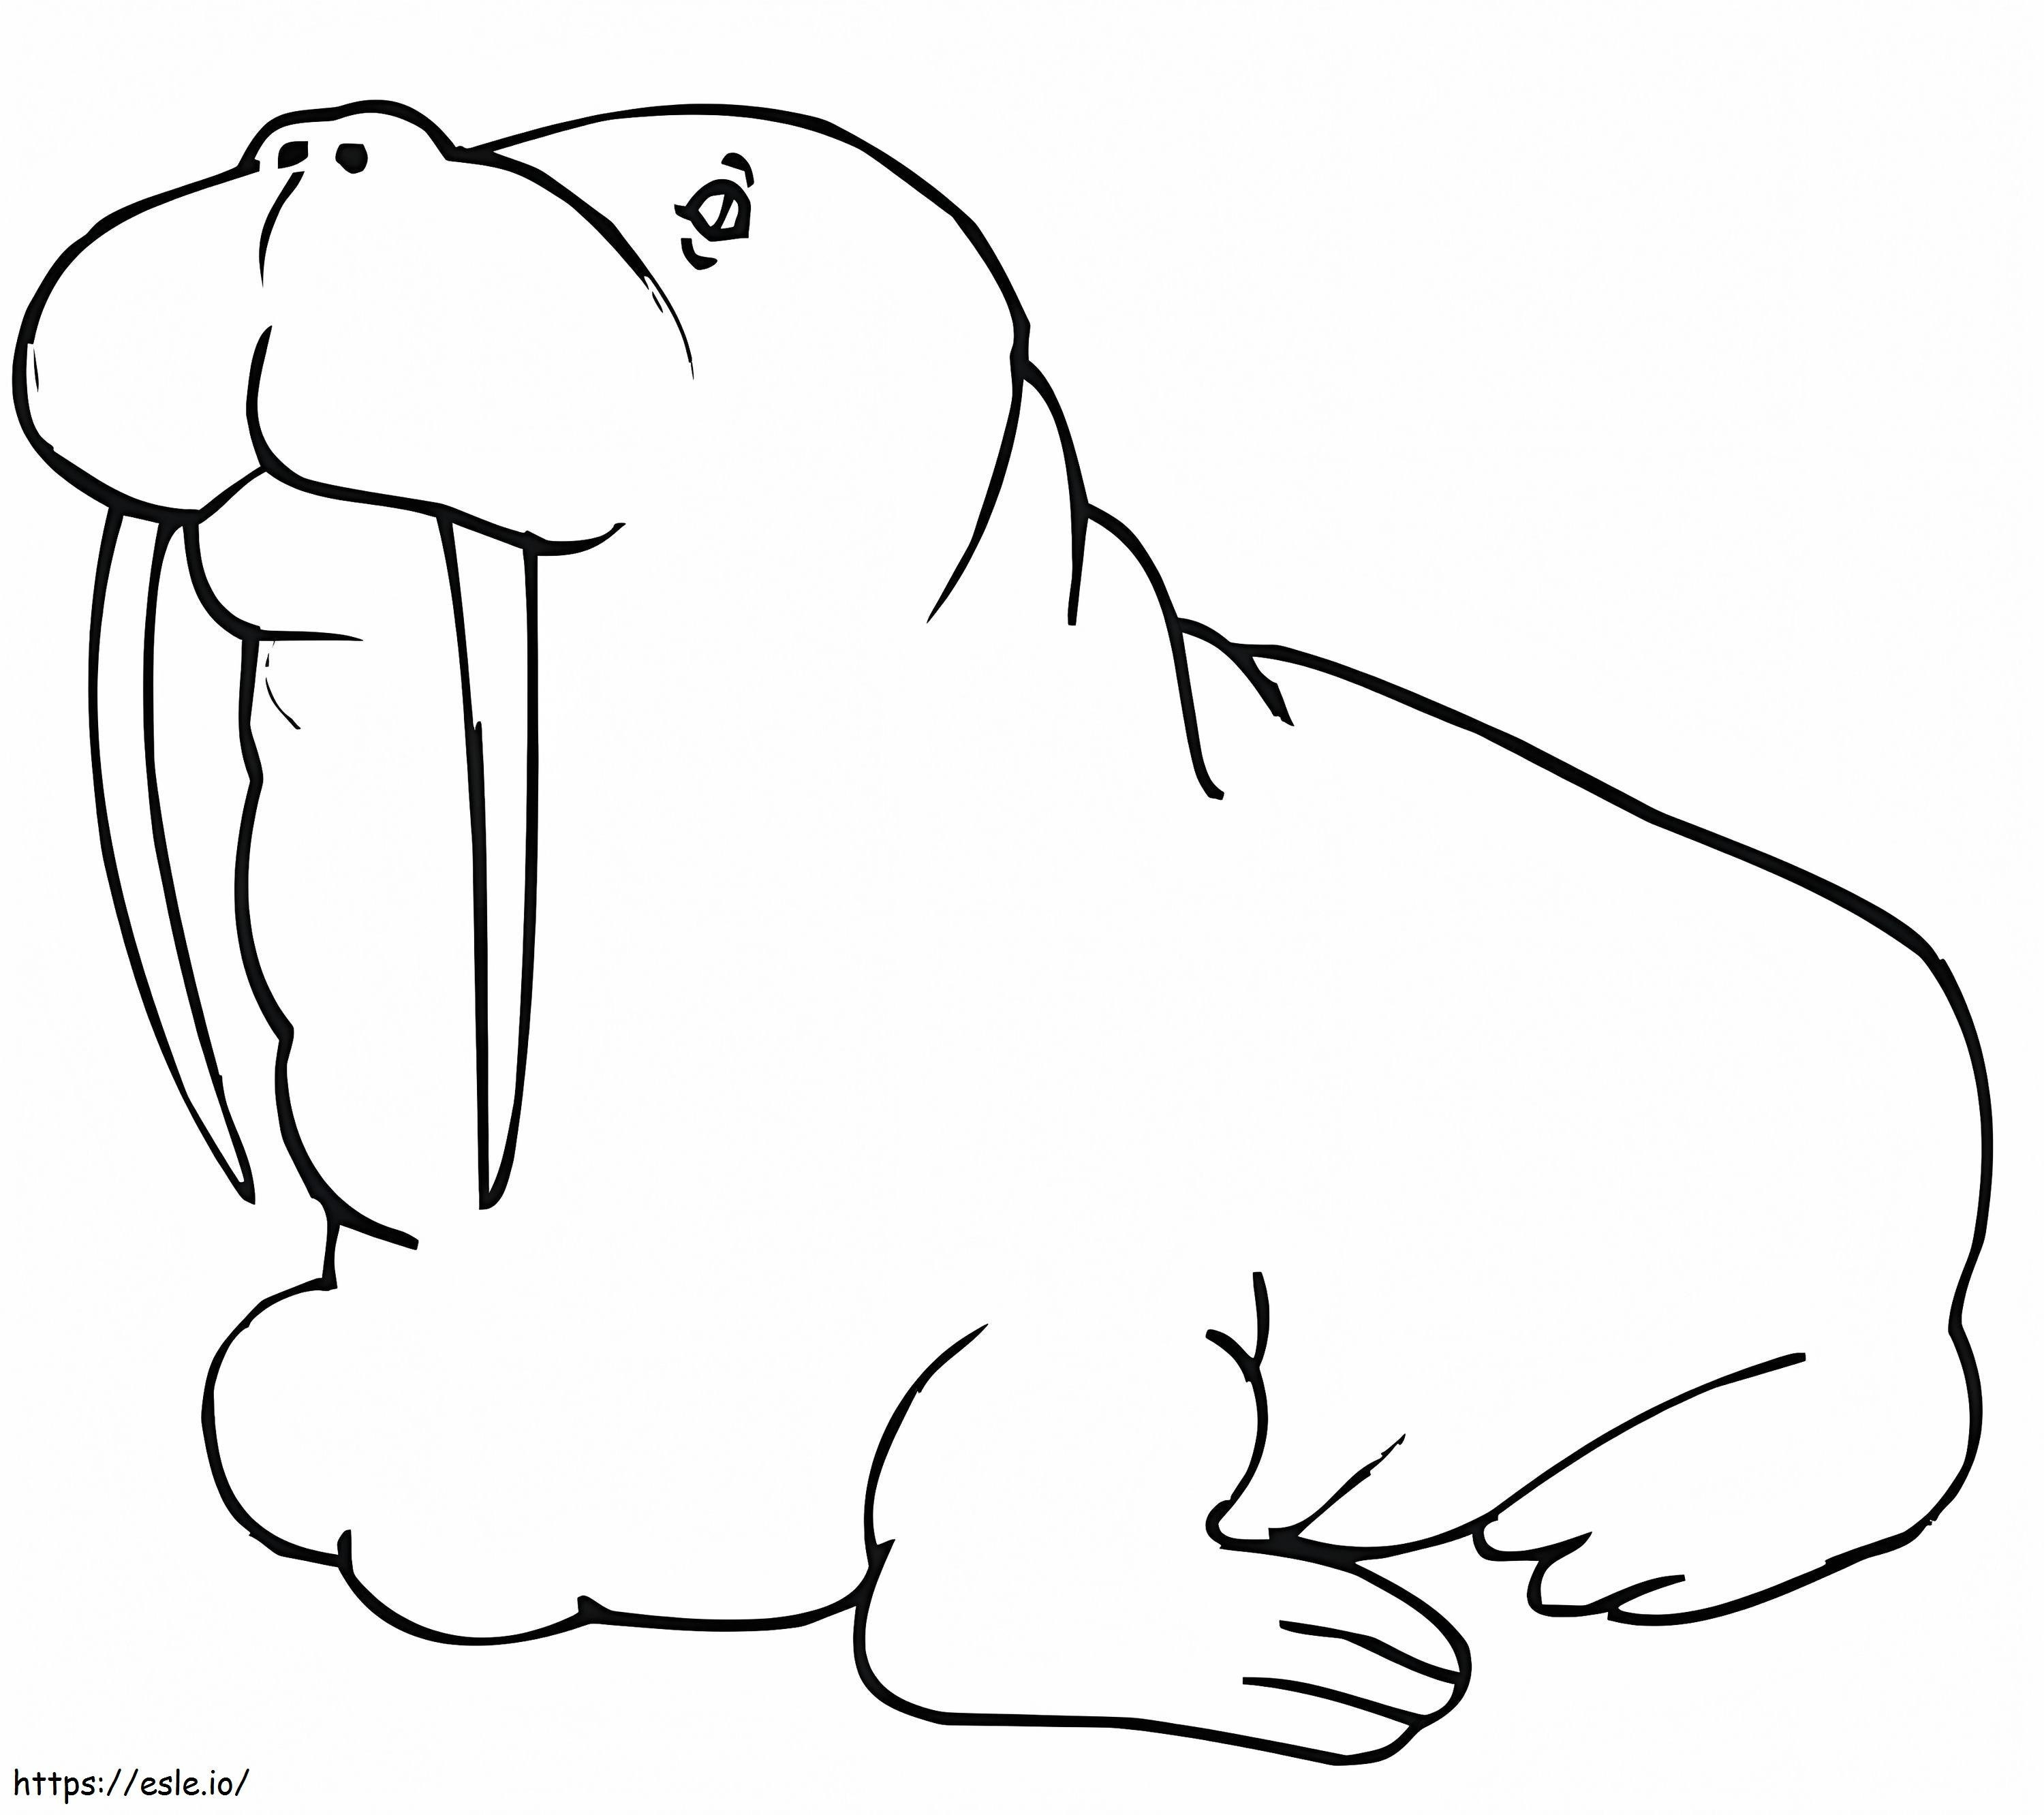 A Fat Walrus coloring page